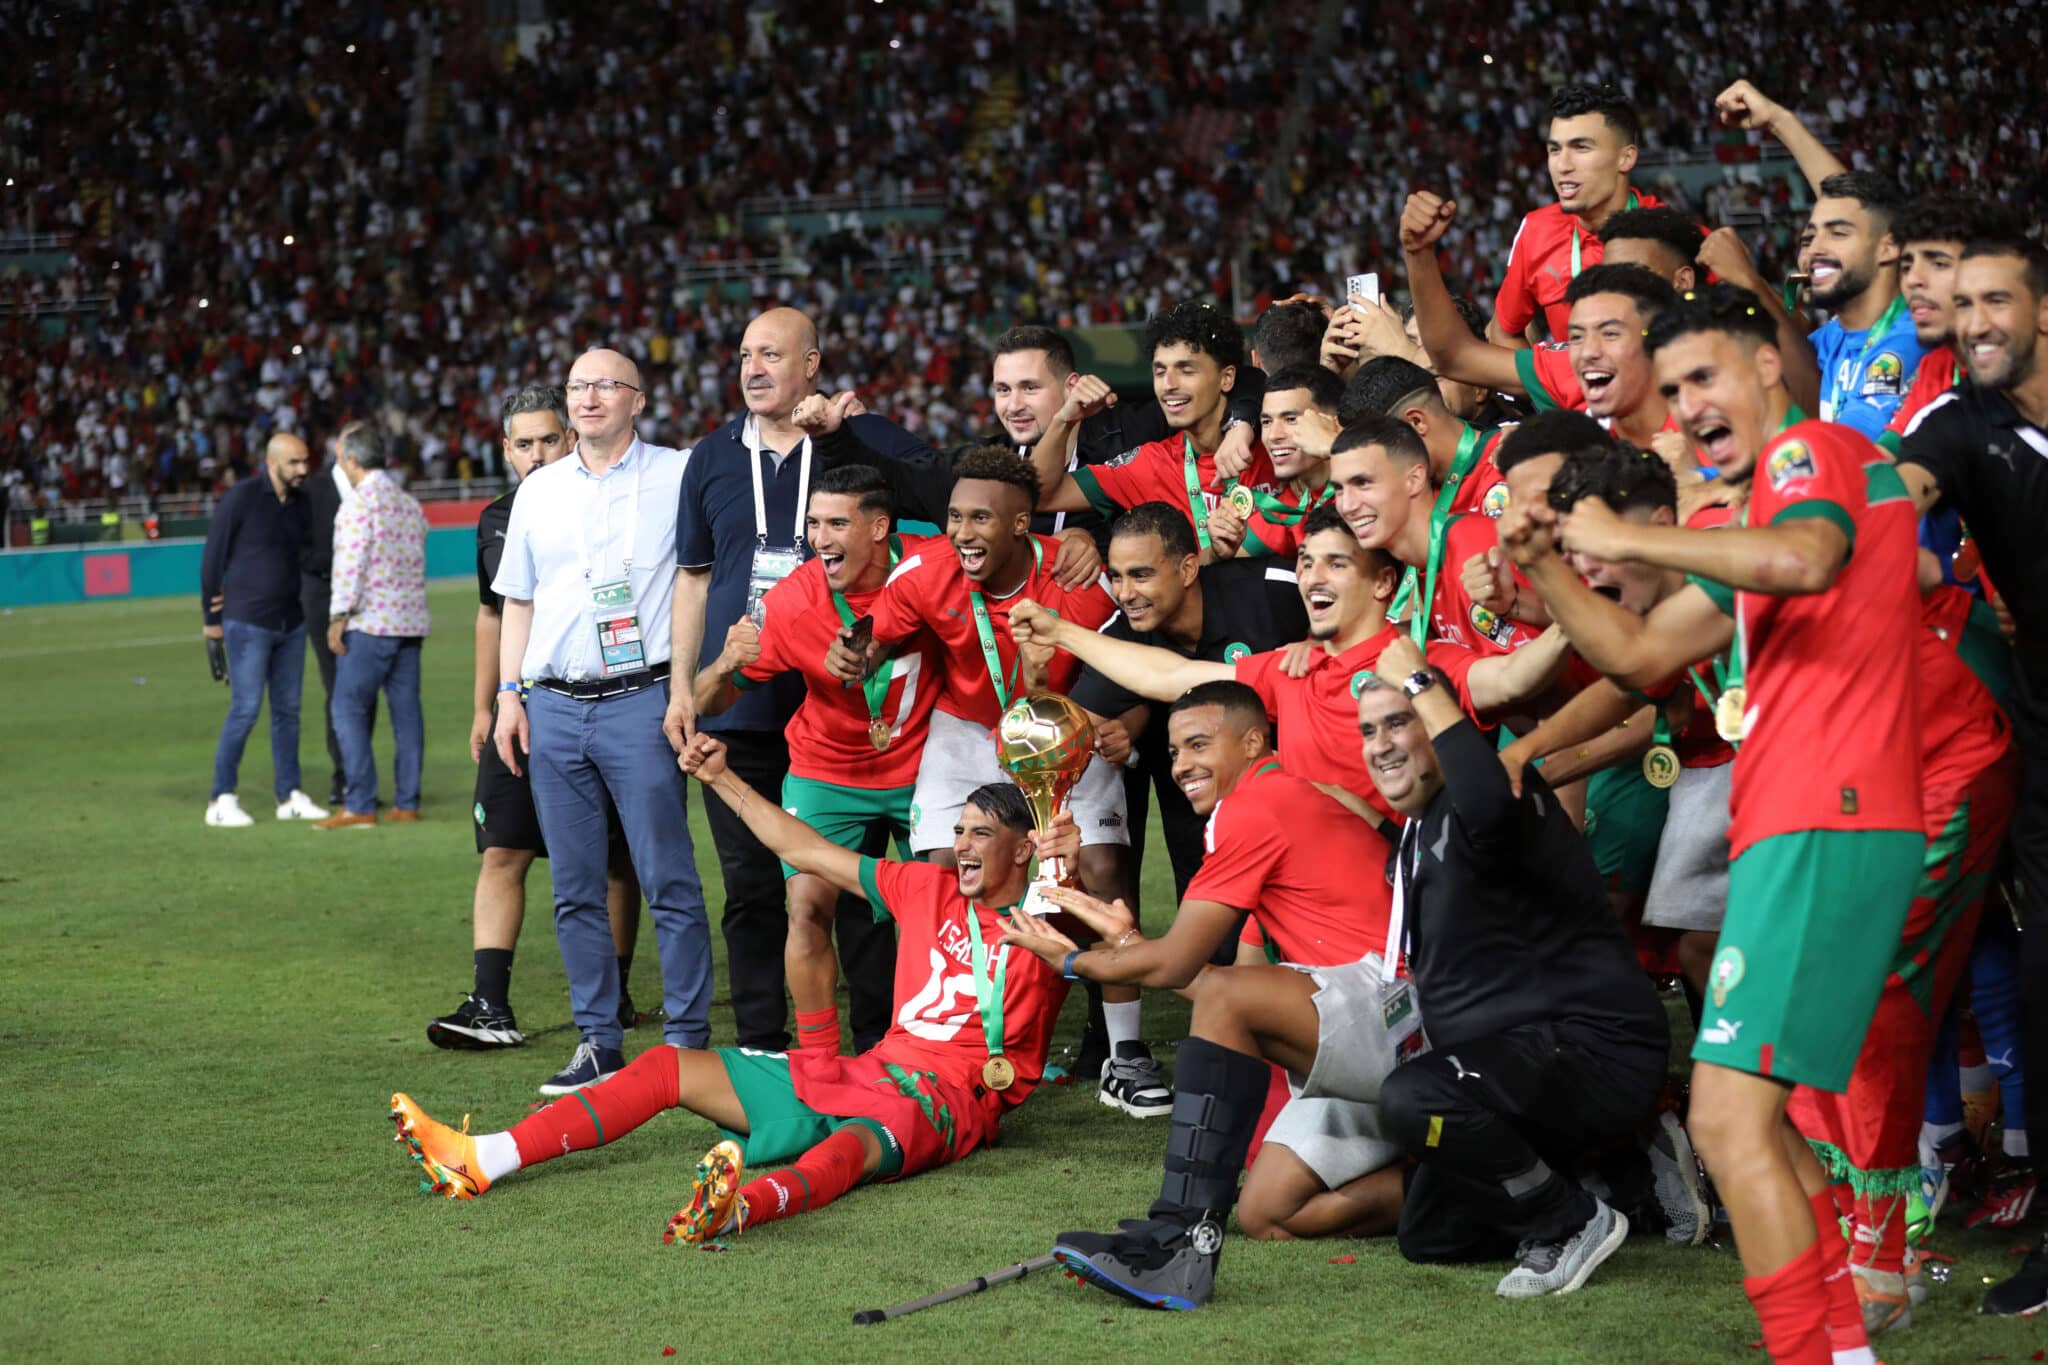 Morocco players celebrate trophy during the 2023 U23 Africa Cup of Nations final match between Morocco v Egypt held at Prince Moulay Abdallah Stadium in Rabat, Morocco on 08 July 2023 Ladjal Djafaar/Sports Inc - Photo by Icon sport